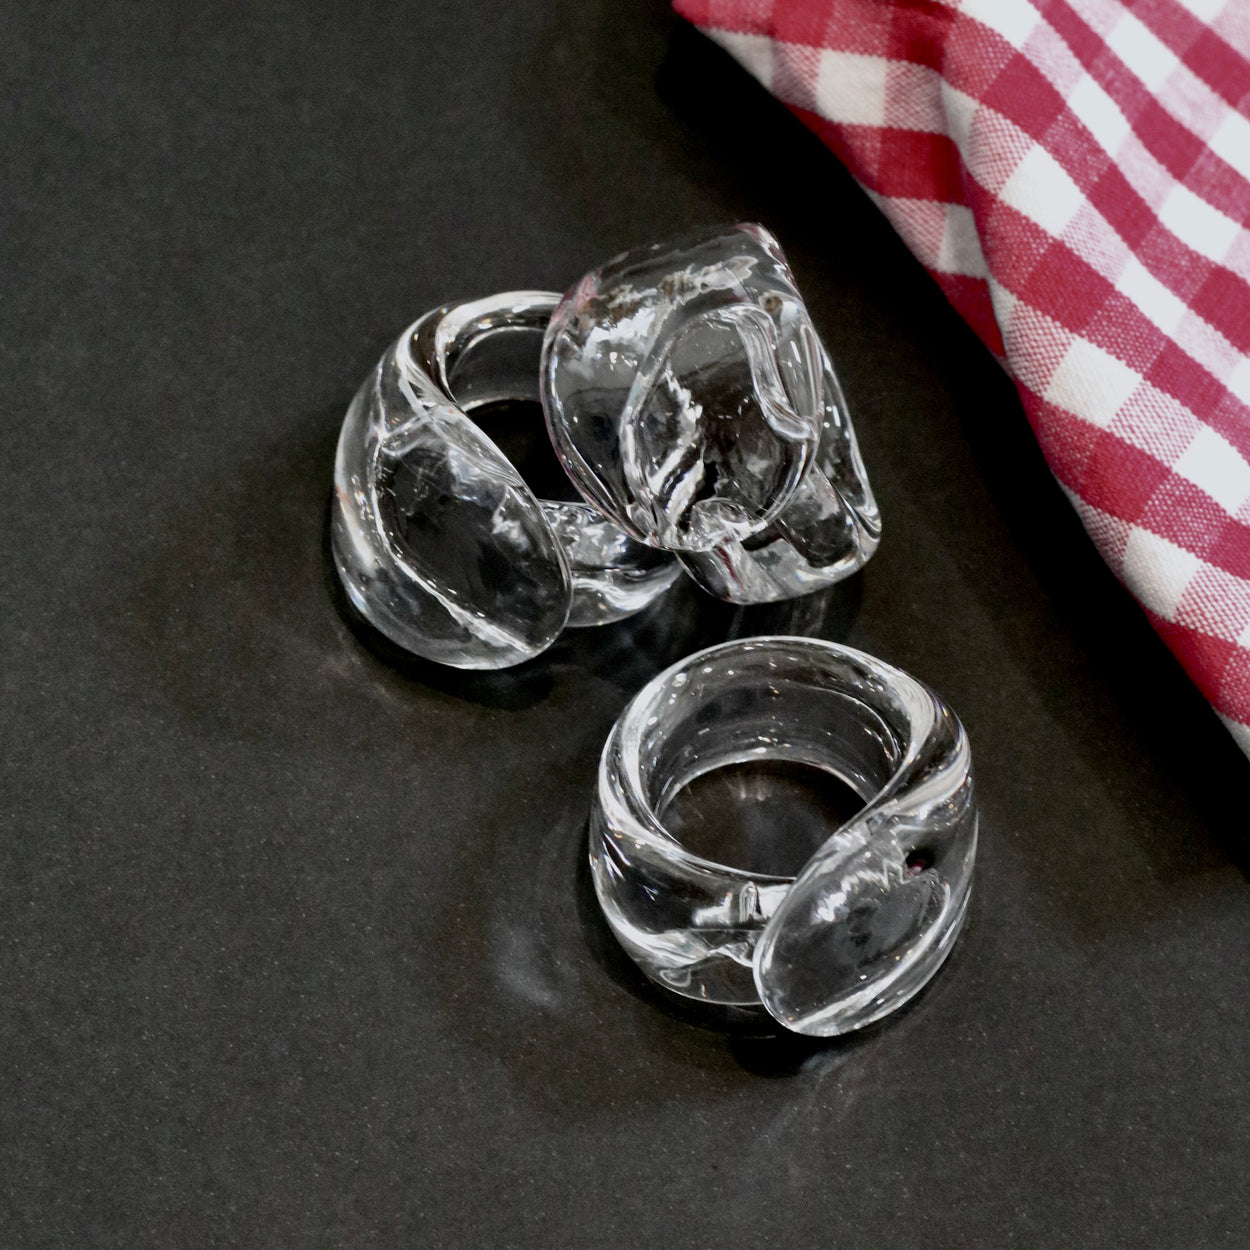 3 Vintage handmade glass napkin rings against a black background, with red gingham napkin.